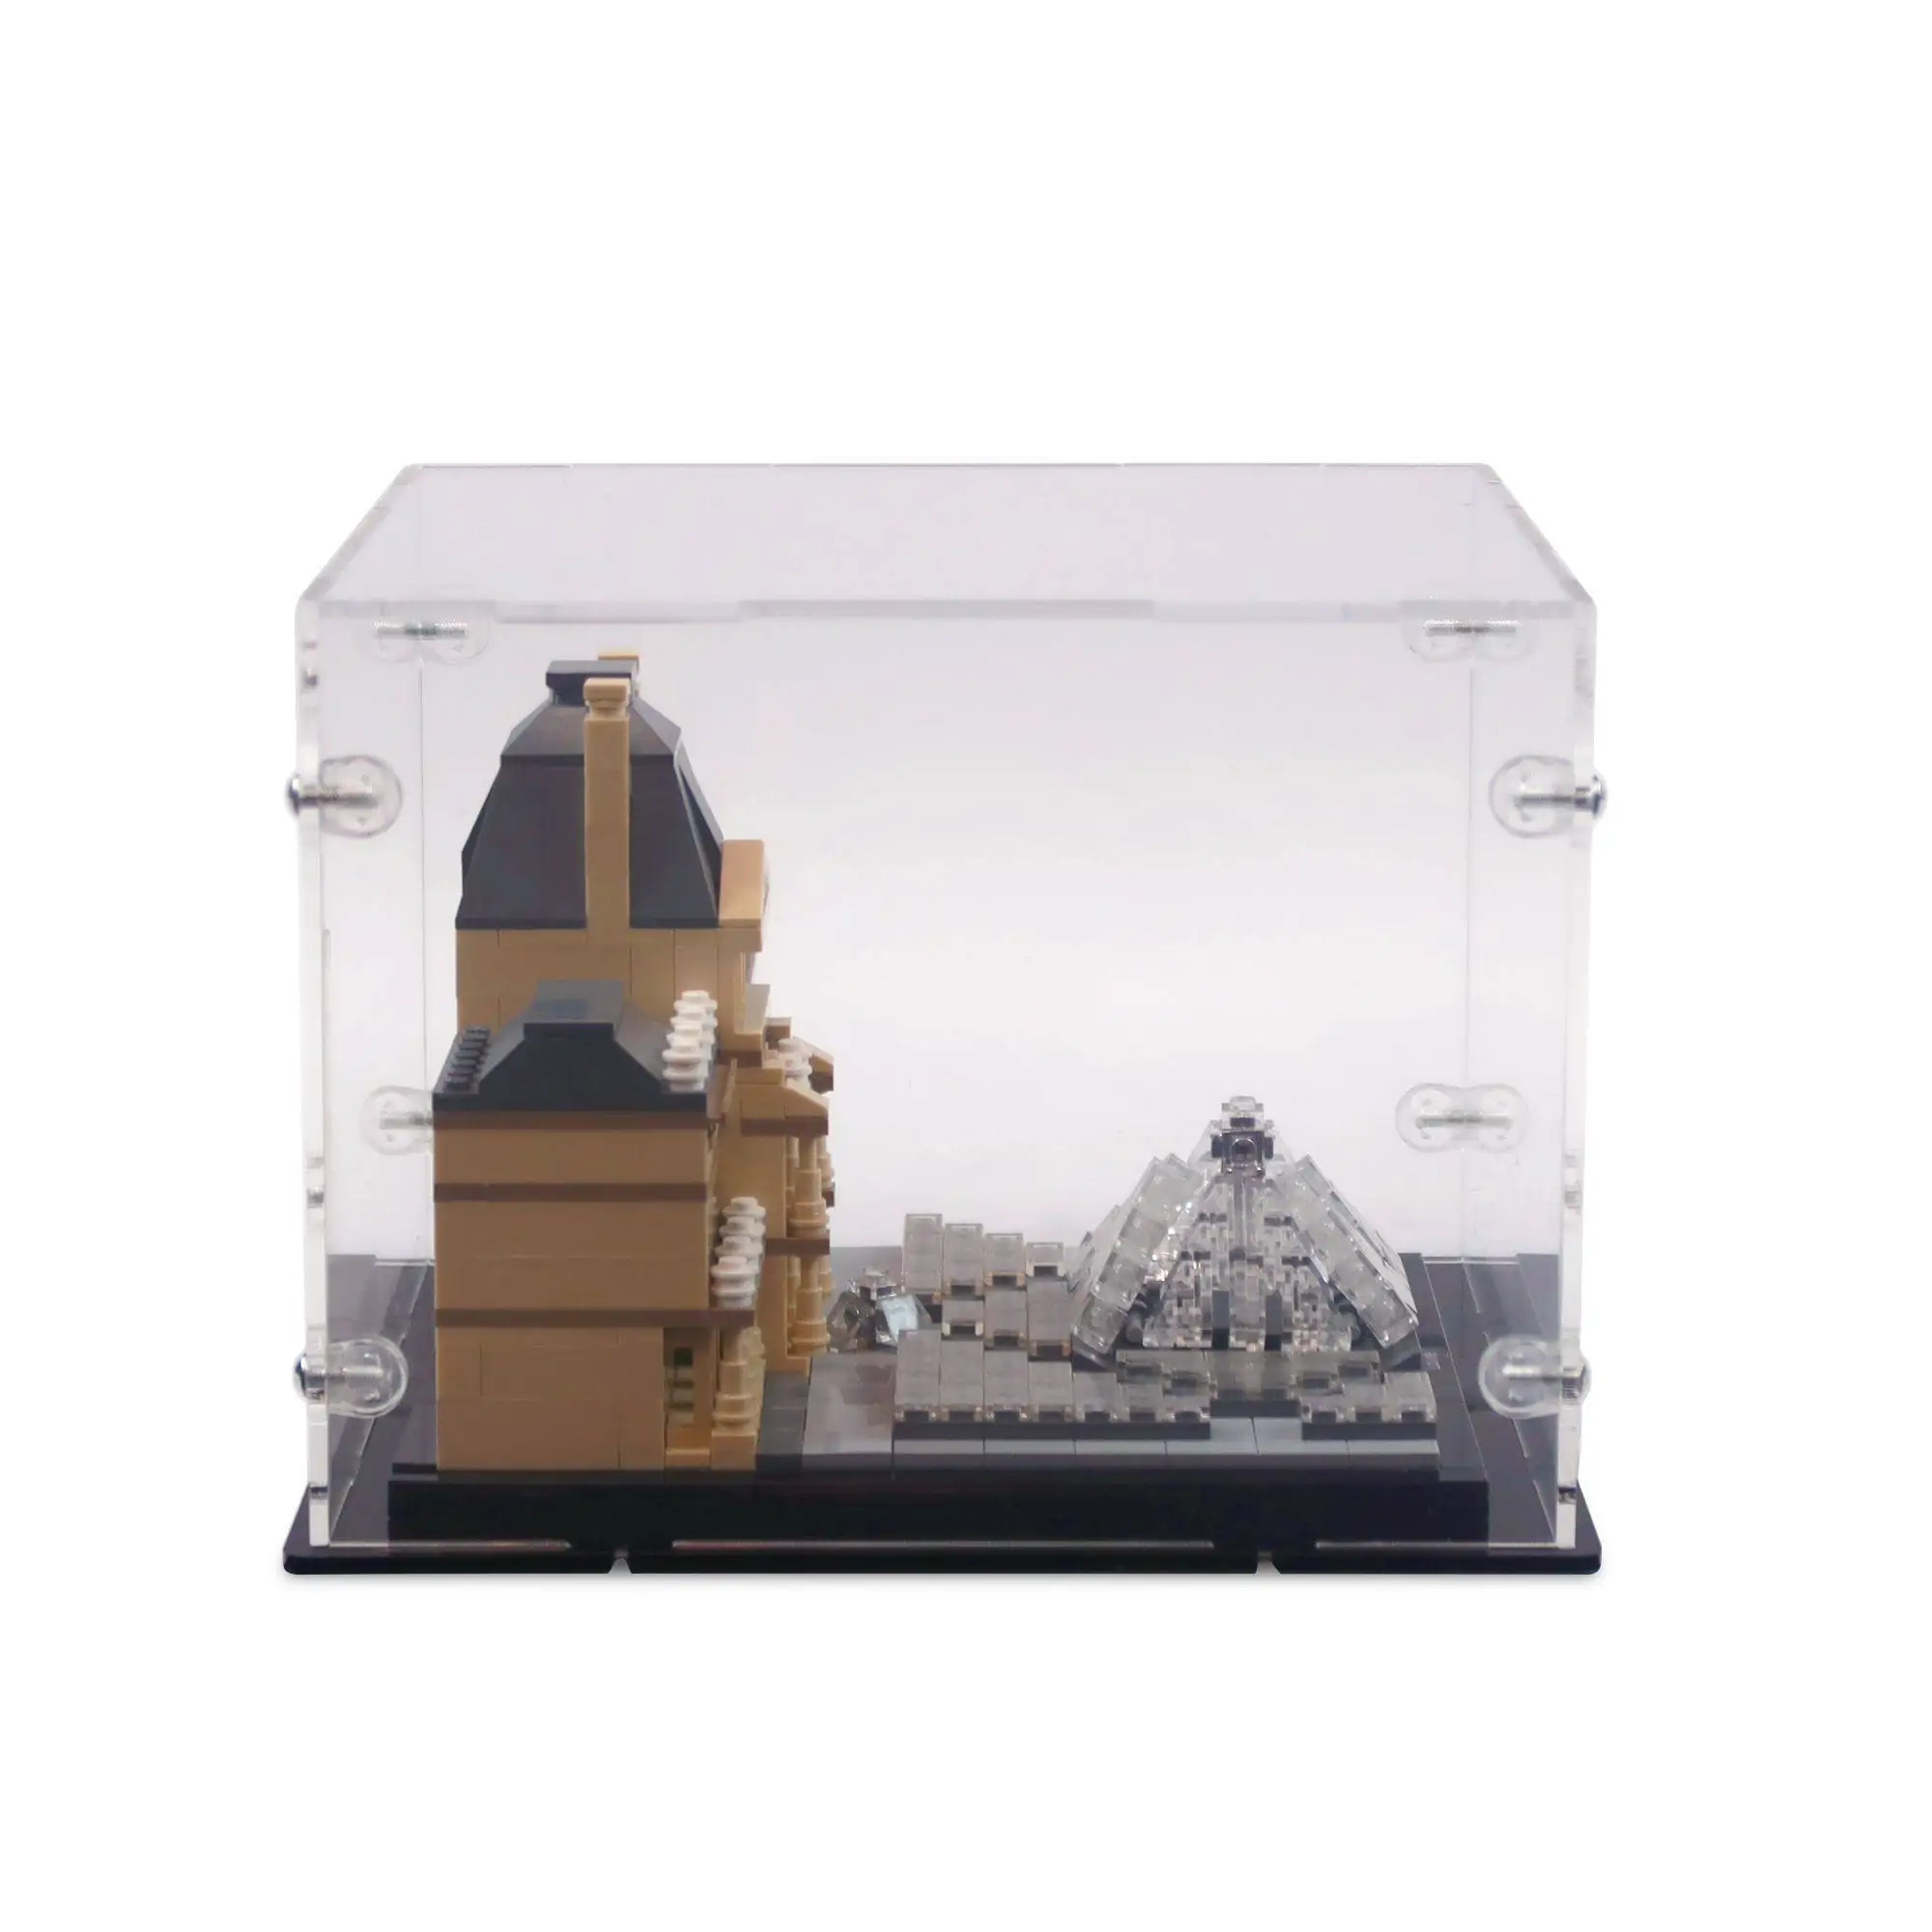 Display Case for LEGO Louvre | iDisplayit